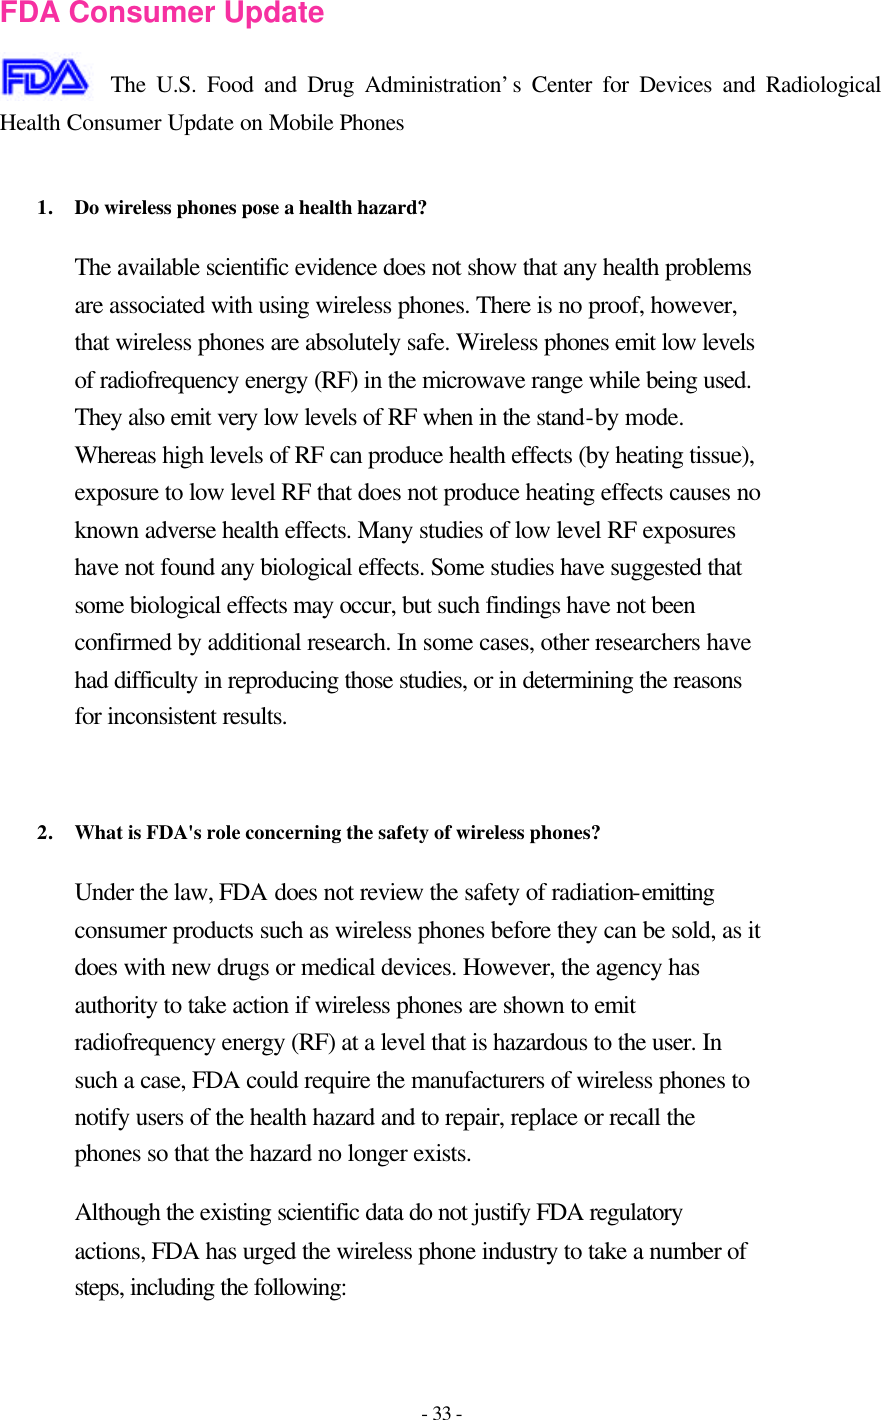 - 33 -  FDA Consumer Update  The U.S. Food and Drug Administration’s Center for Devices and Radiological Health Consumer Update on Mobile Phones  1. Do wireless phones pose a health hazard?  The available scientific evidence does not show that any health problems are associated with using wireless phones. There is no proof, however, that wireless phones are absolutely safe. Wireless phones emit low levels of radiofrequency energy (RF) in the microwave range while being used. They also emit very low levels of RF when in the stand-by mode. Whereas high levels of RF can produce health effects (by heating tissue), exposure to low level RF that does not produce heating effects causes no known adverse health effects. Many studies of low level RF exposures have not found any biological effects. Some studies have suggested that some biological effects may occur, but such findings have not been confirmed by additional research. In some cases, other researchers have had difficulty in reproducing those studies, or in determining the reasons for inconsistent results.   2. What is FDA&apos;s role concerning the safety of wireless phones?  Under the law, FDA does not review the safety of radiation-emitting consumer products such as wireless phones before they can be sold, as it does with new drugs or medical devices. However, the agency has authority to take action if wireless phones are shown to emit radiofrequency energy (RF) at a level that is hazardous to the user. In such a case, FDA could require the manufacturers of wireless phones to notify users of the health hazard and to repair, replace or recall the phones so that the hazard no longer exists. Although the existing scientific data do not justify FDA regulatory actions, FDA has urged the wireless phone industry to take a number of steps, including the following: 